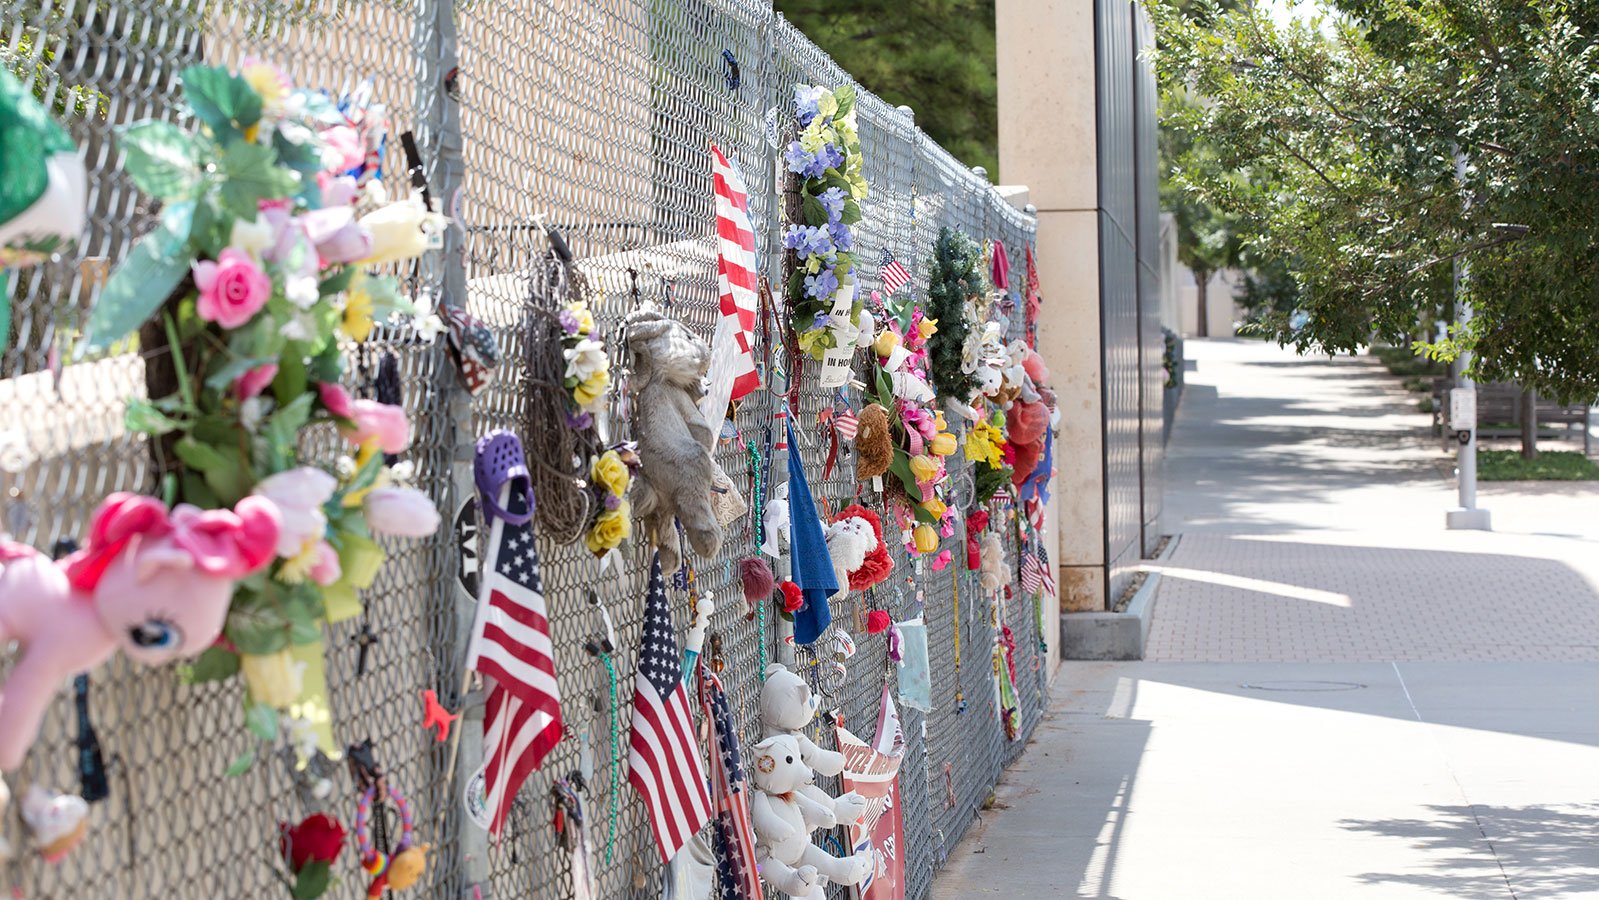 The fence that was originally installed to protect the site of the Murrah Federal Building became a place for people to leave tokens of love and remembrance